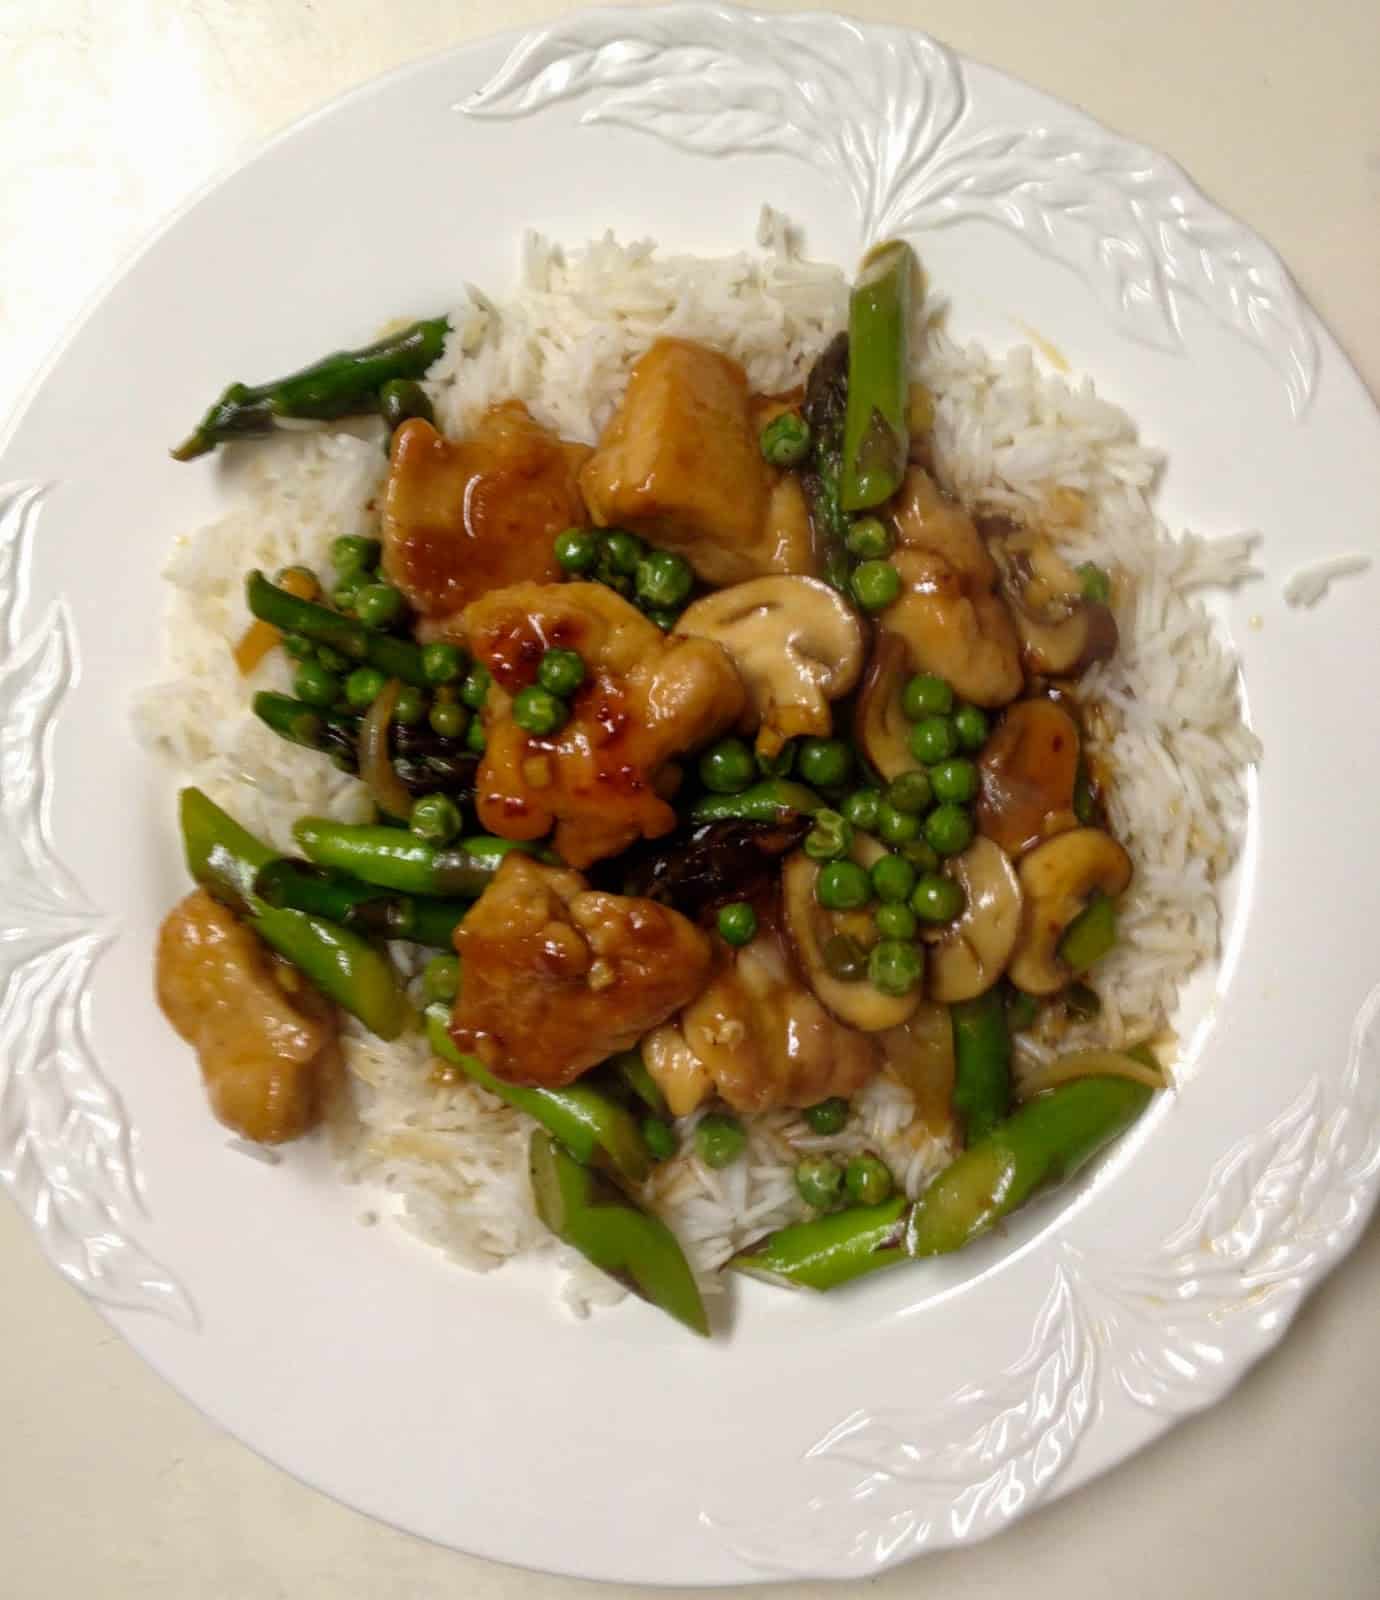 Ginger Chicken Stir-Fry with Asparagus, Peas and Cremini Mushrooms